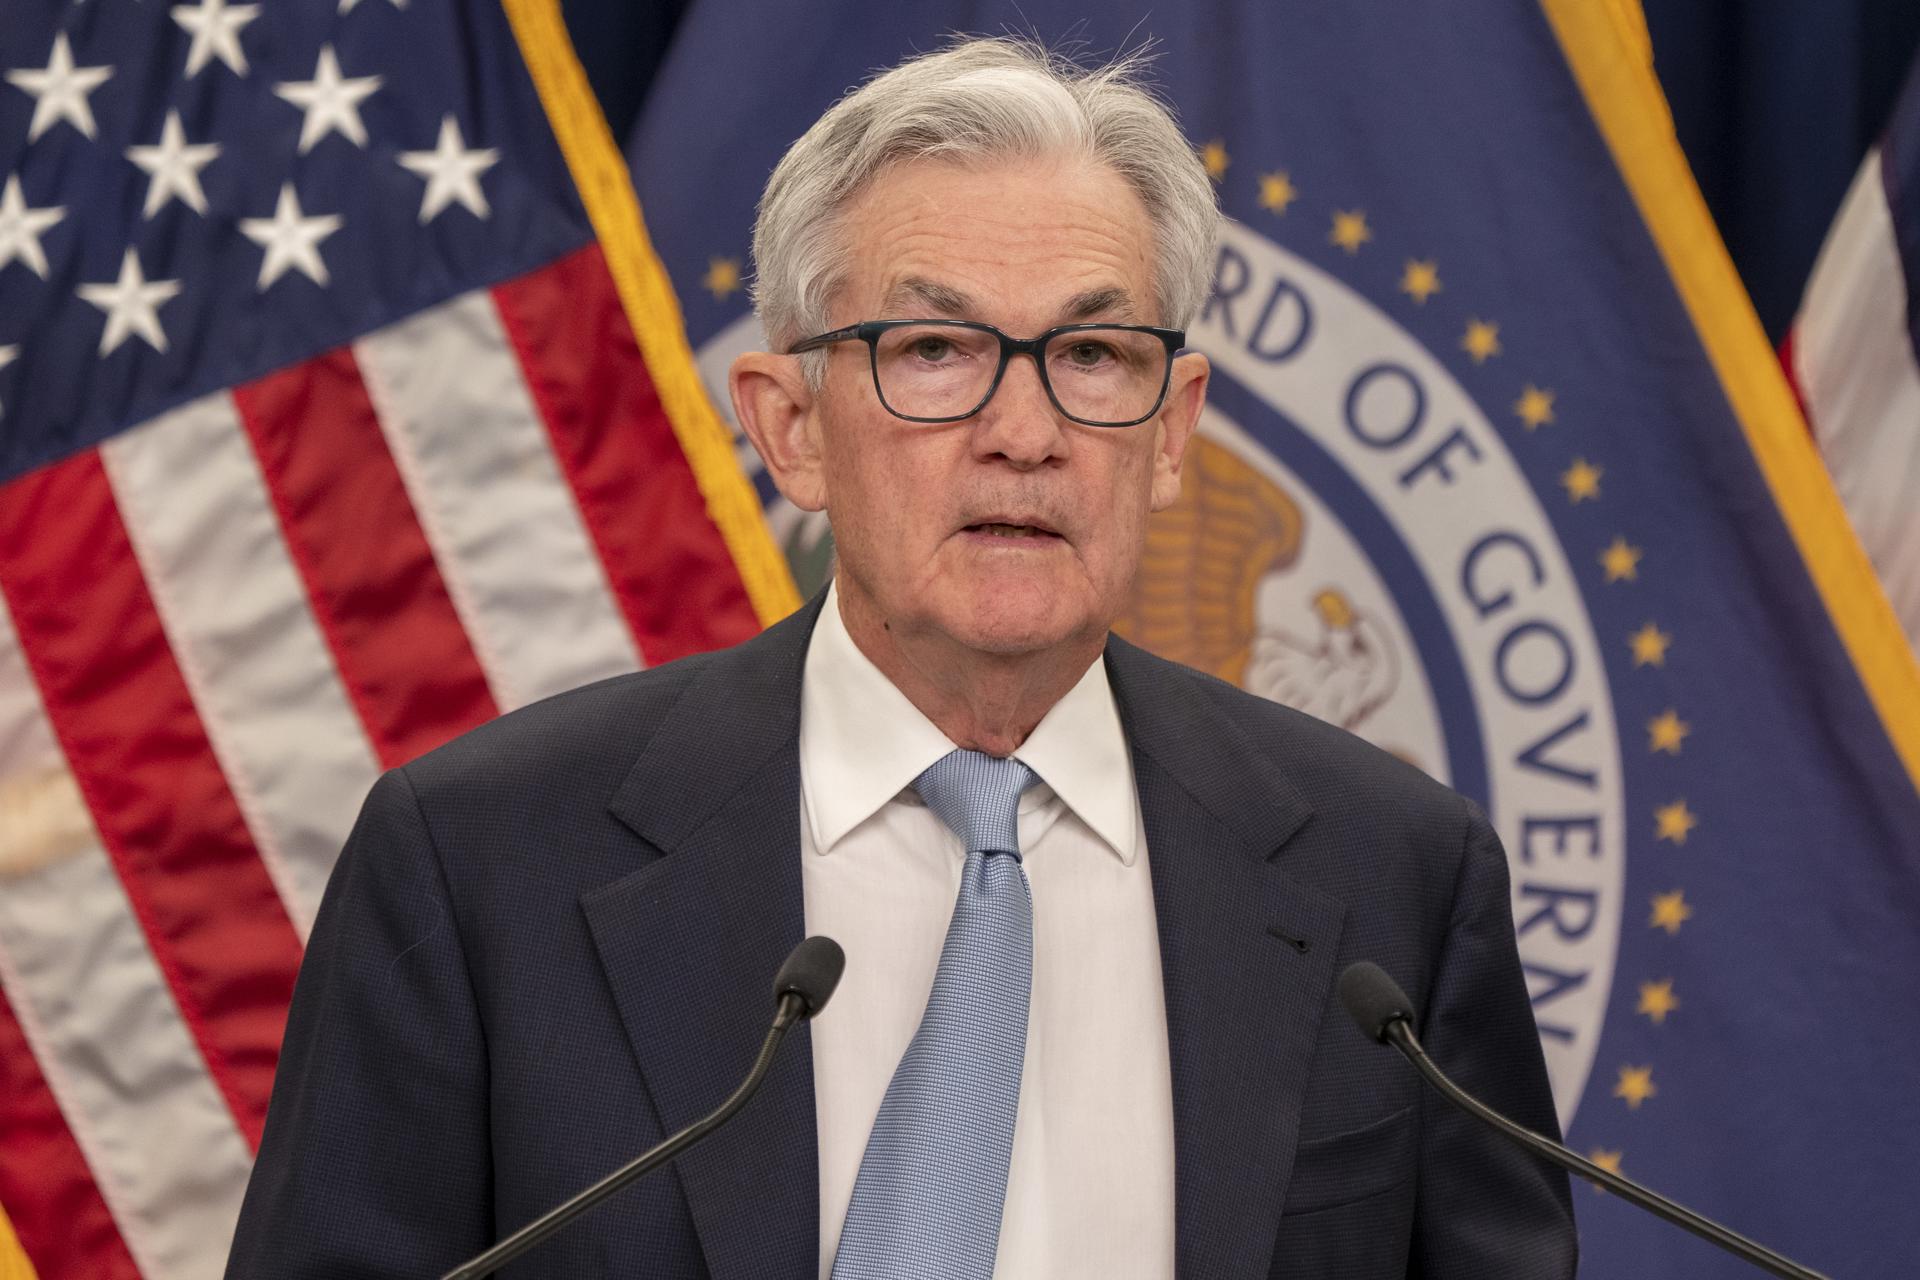 US Federal Reserve Chairman Jerome Powell holds a press conference in Washington on 22 March 2023. EFE/Shawn Thew